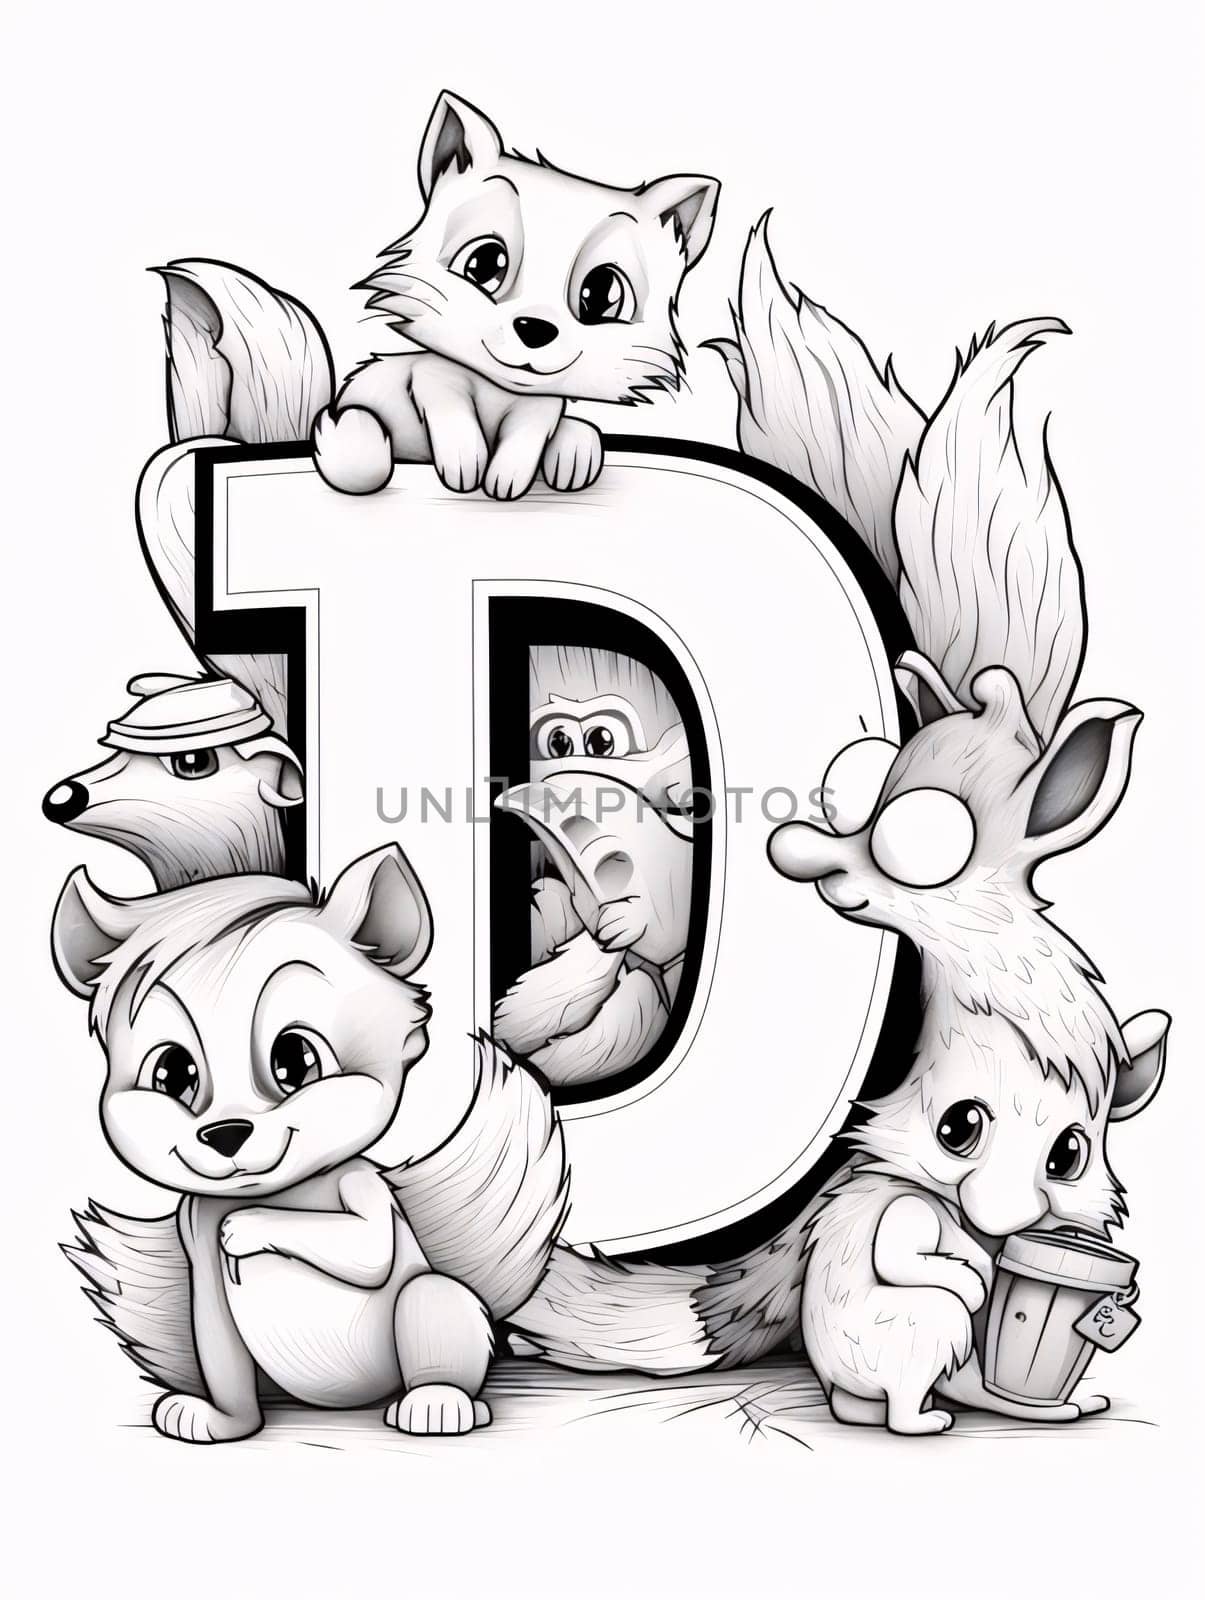 Graphic alphabet letters: Font design for the letter D with cute cartoon animals. Vector illustration.